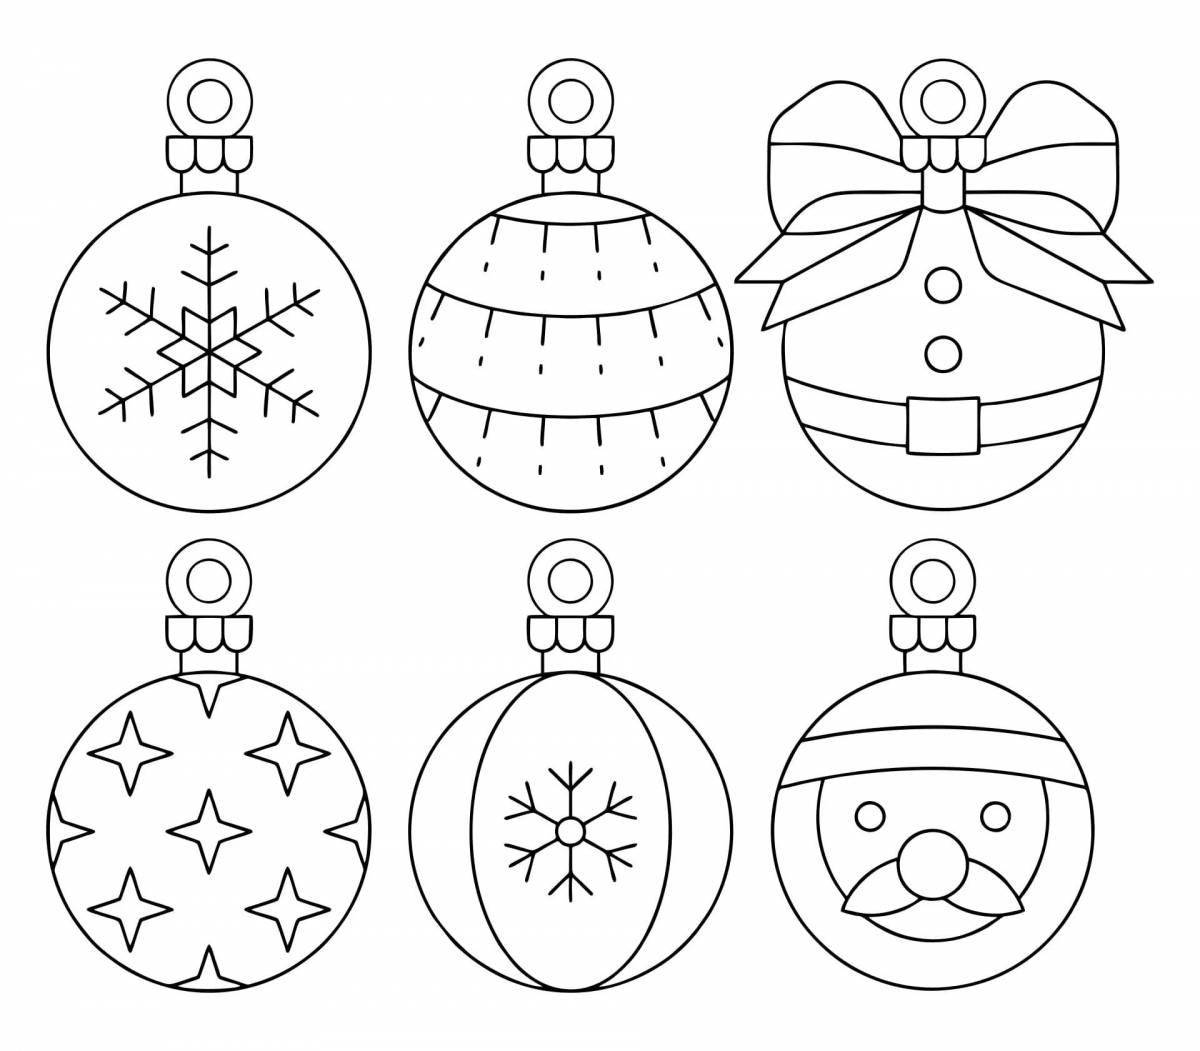 Dazzling Christmas decorations for 5-6 year olds